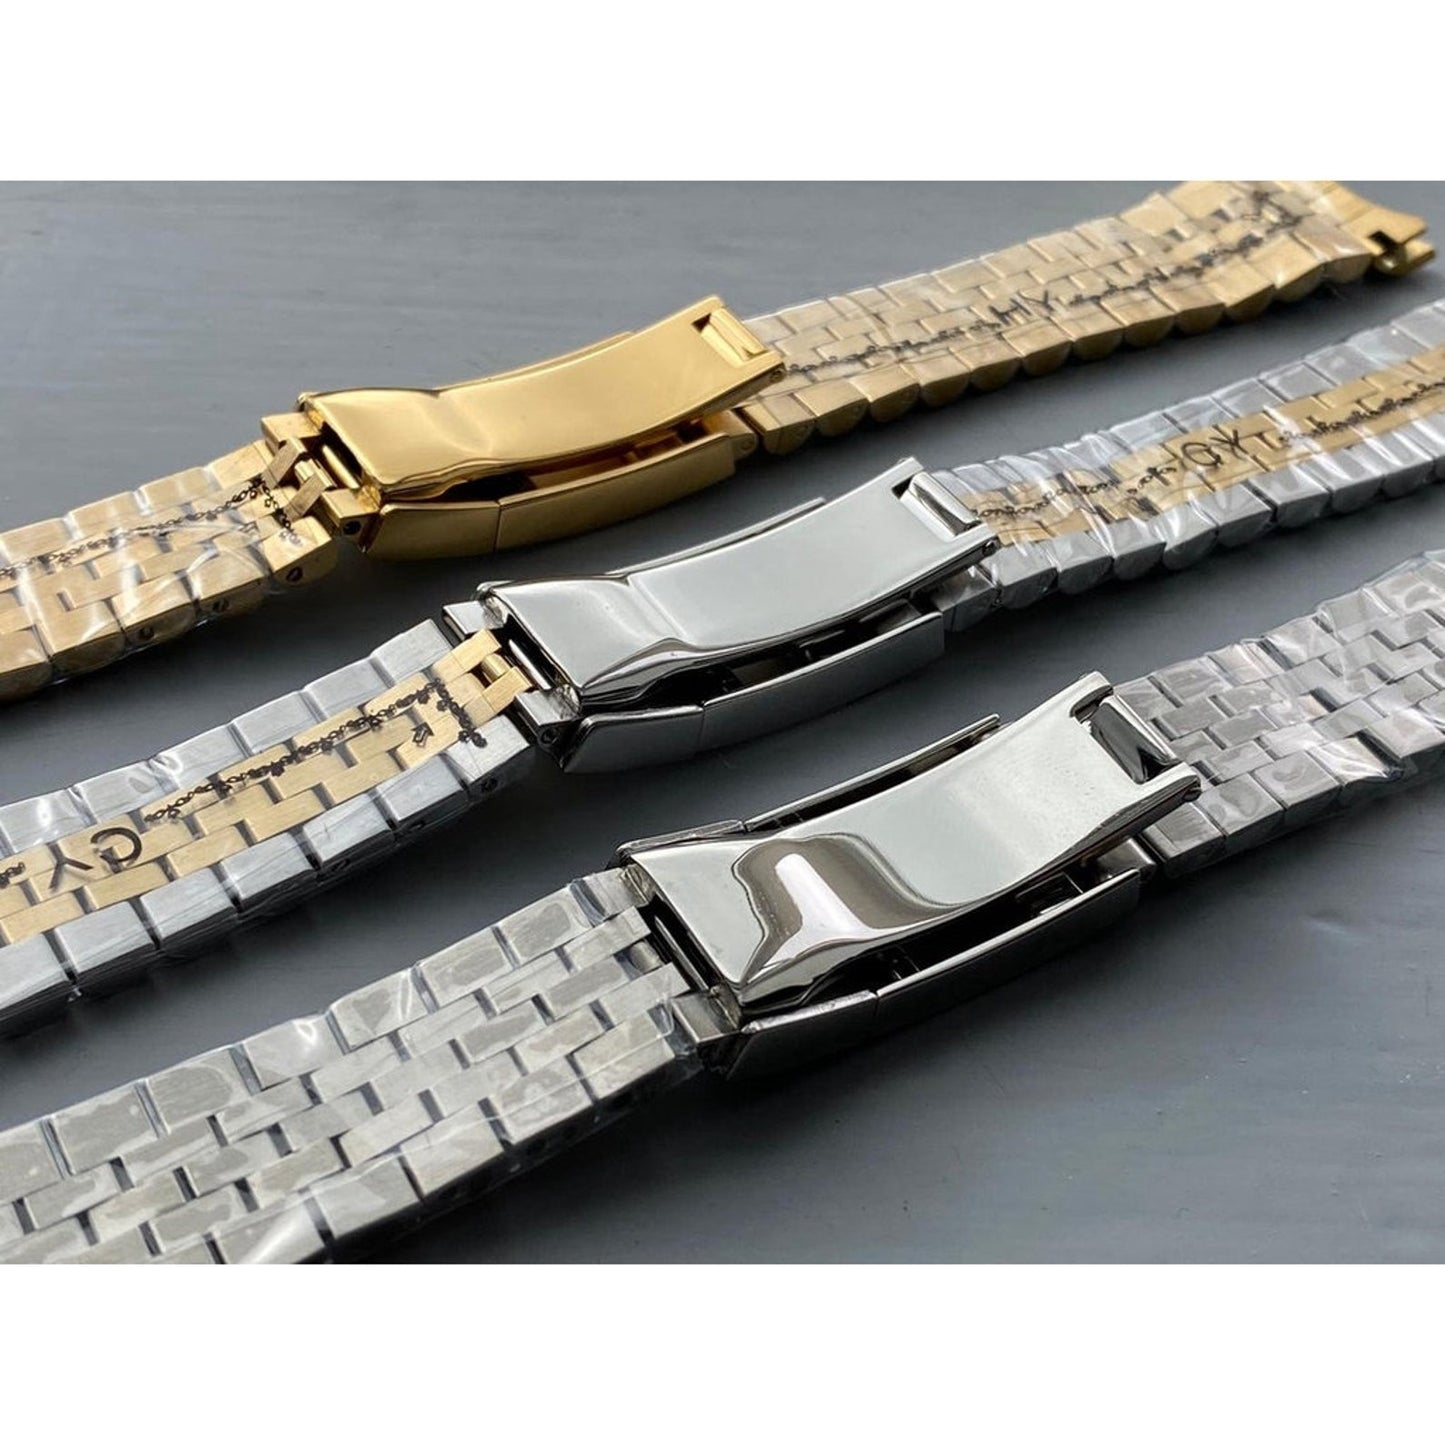 20MM Silver Gold Jubilee Watch Strap Band Oyster Clasp Bracelet For Rolex Stainless Solid Link Daytona, Submariner, Datejust, Yachtmaster